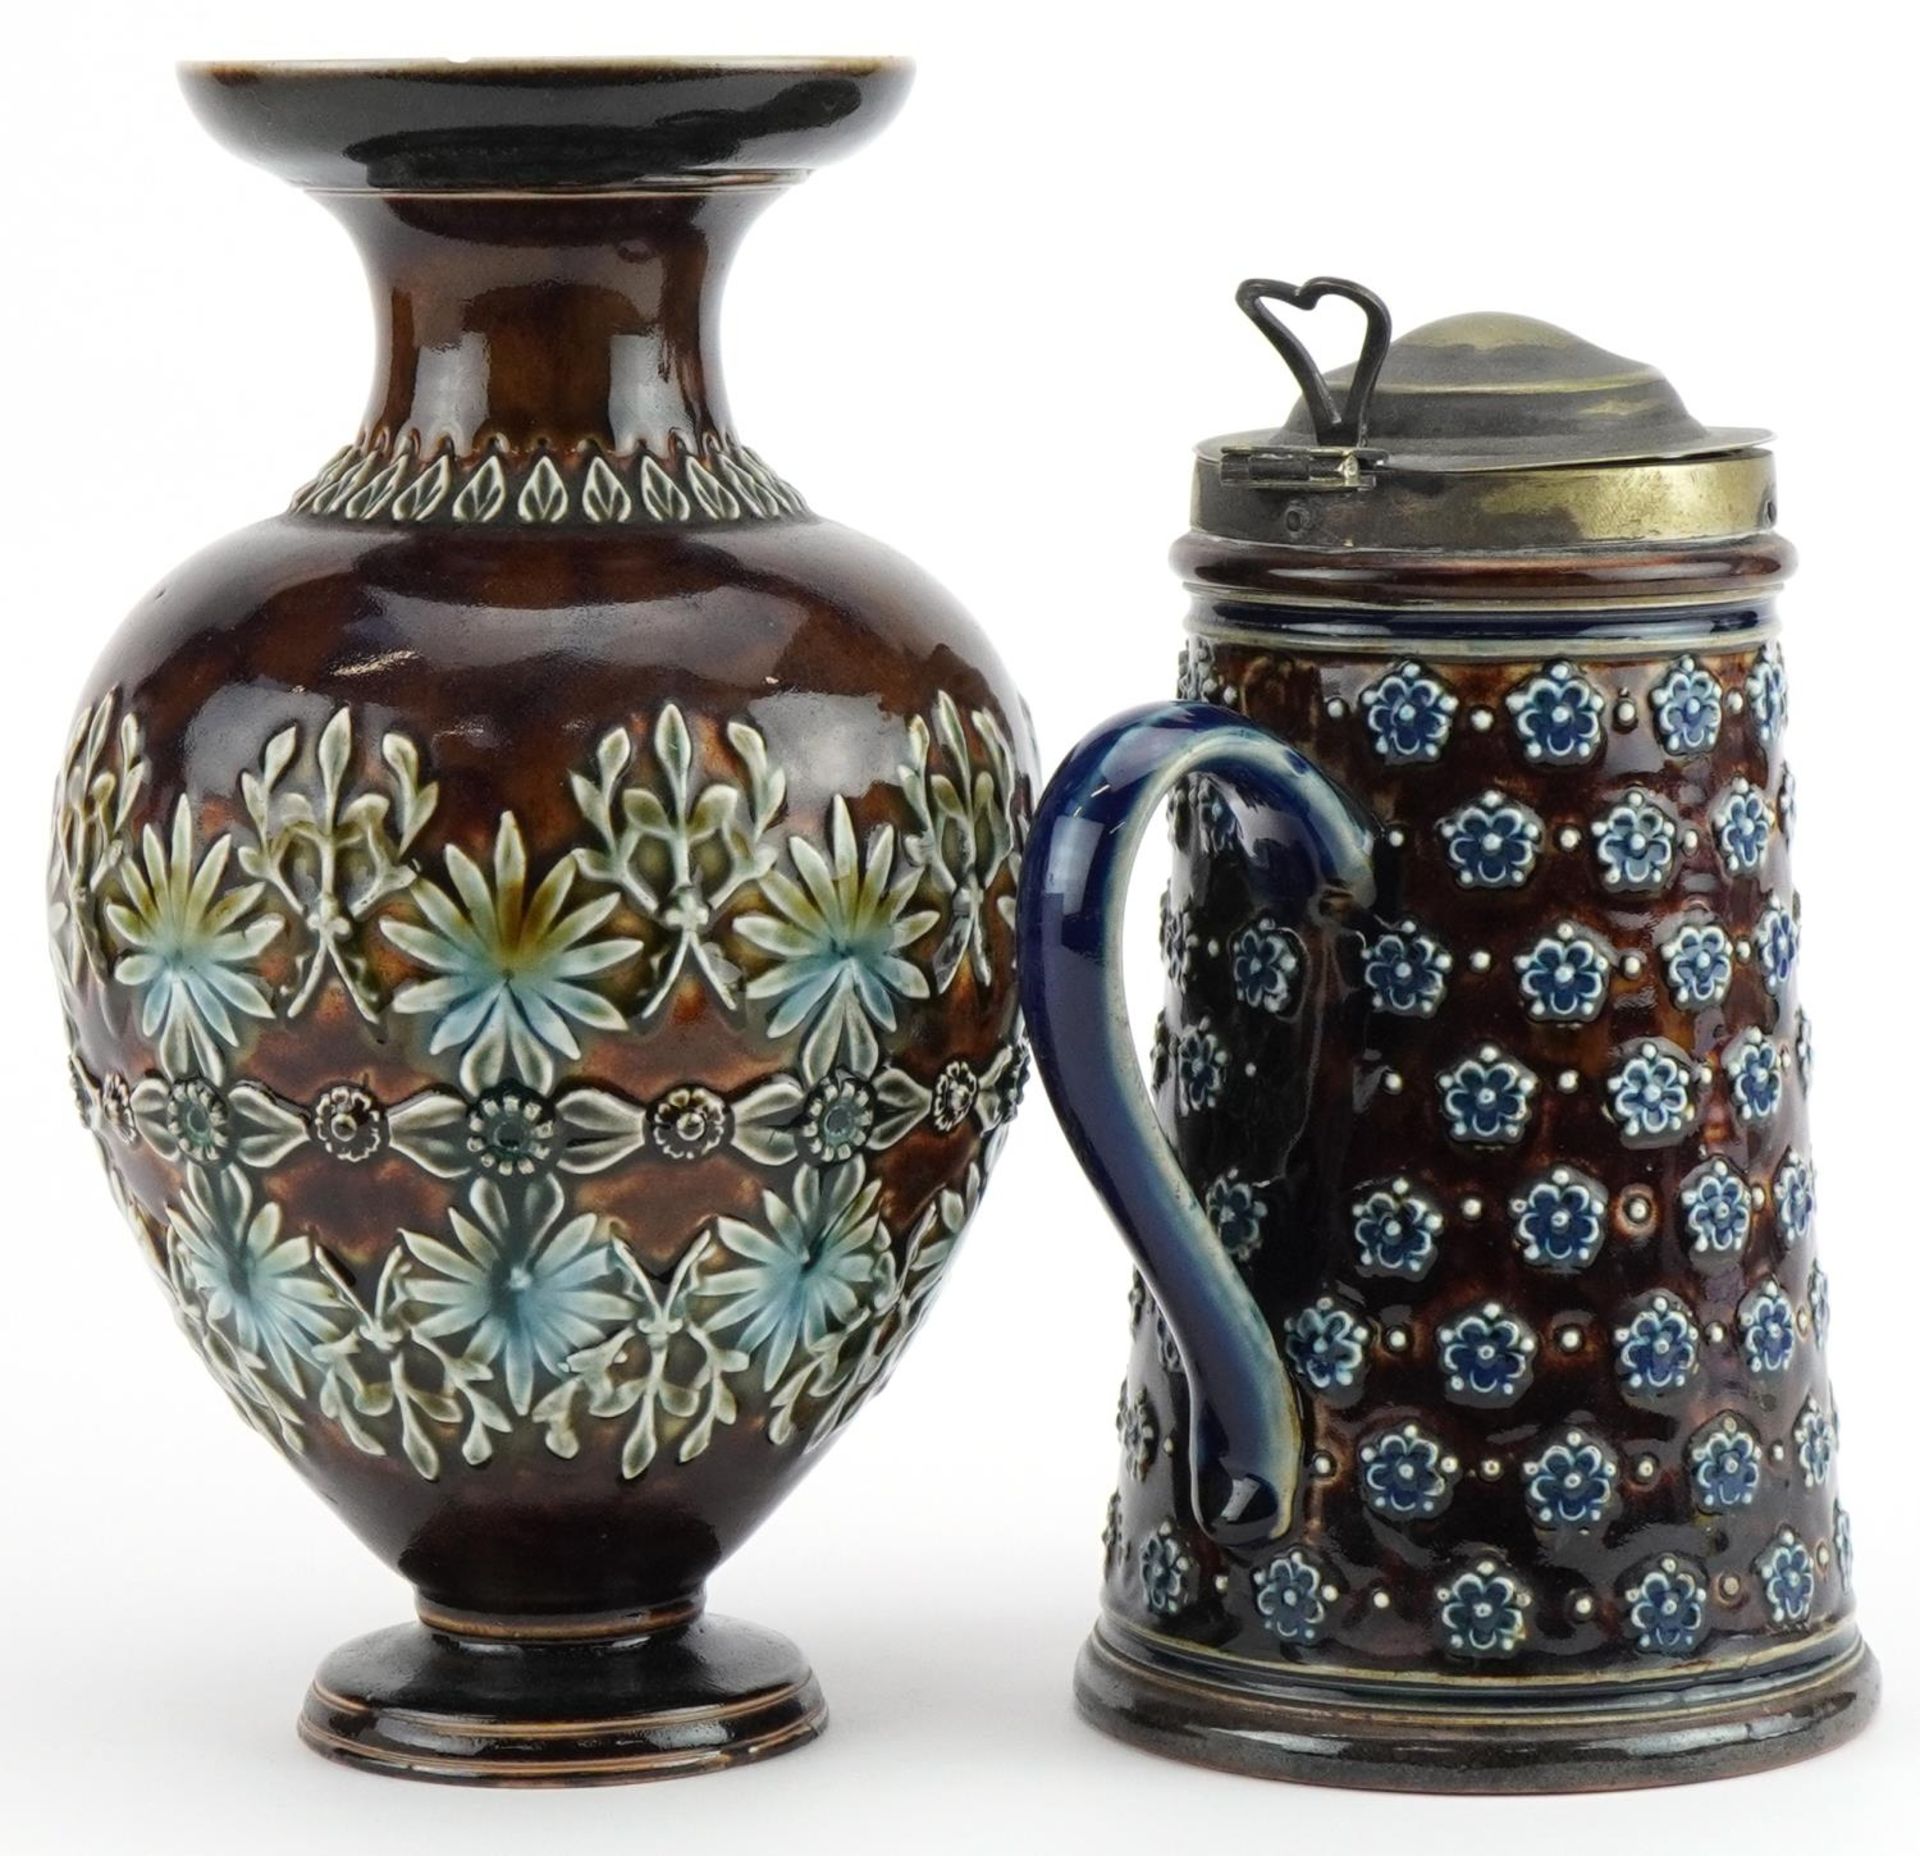 Doulton Lambeth, Art Nouveau Royal Doulton stoneware vase and jug with silver plated mounts, the - Image 2 of 4